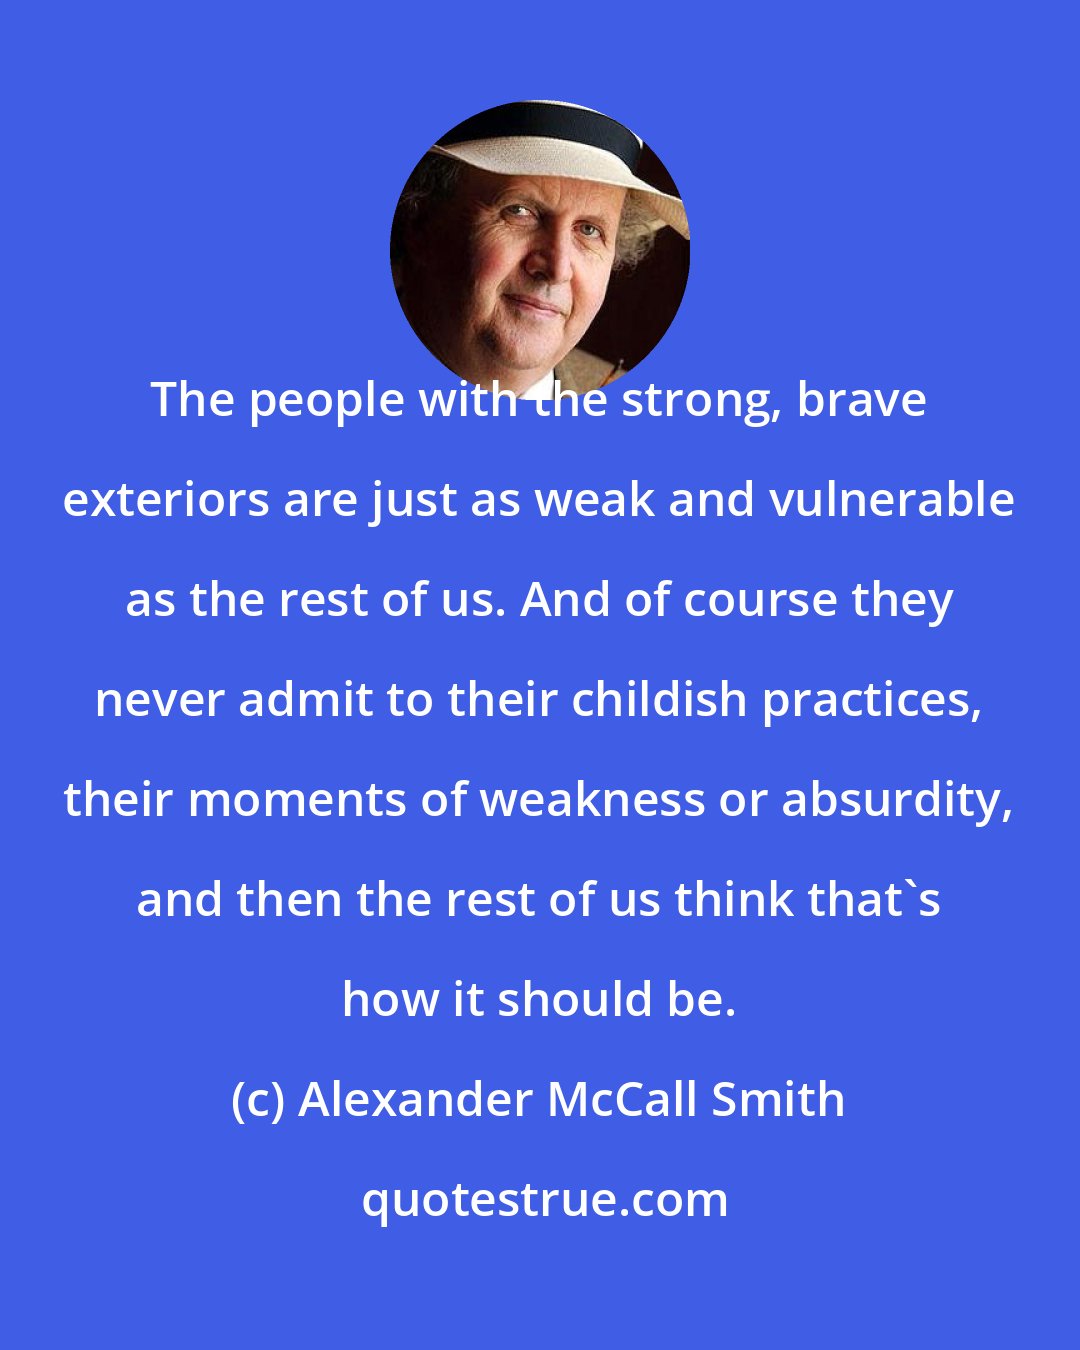 Alexander McCall Smith: The people with the strong, brave exteriors are just as weak and vulnerable as the rest of us. And of course they never admit to their childish practices, their moments of weakness or absurdity, and then the rest of us think that's how it should be.